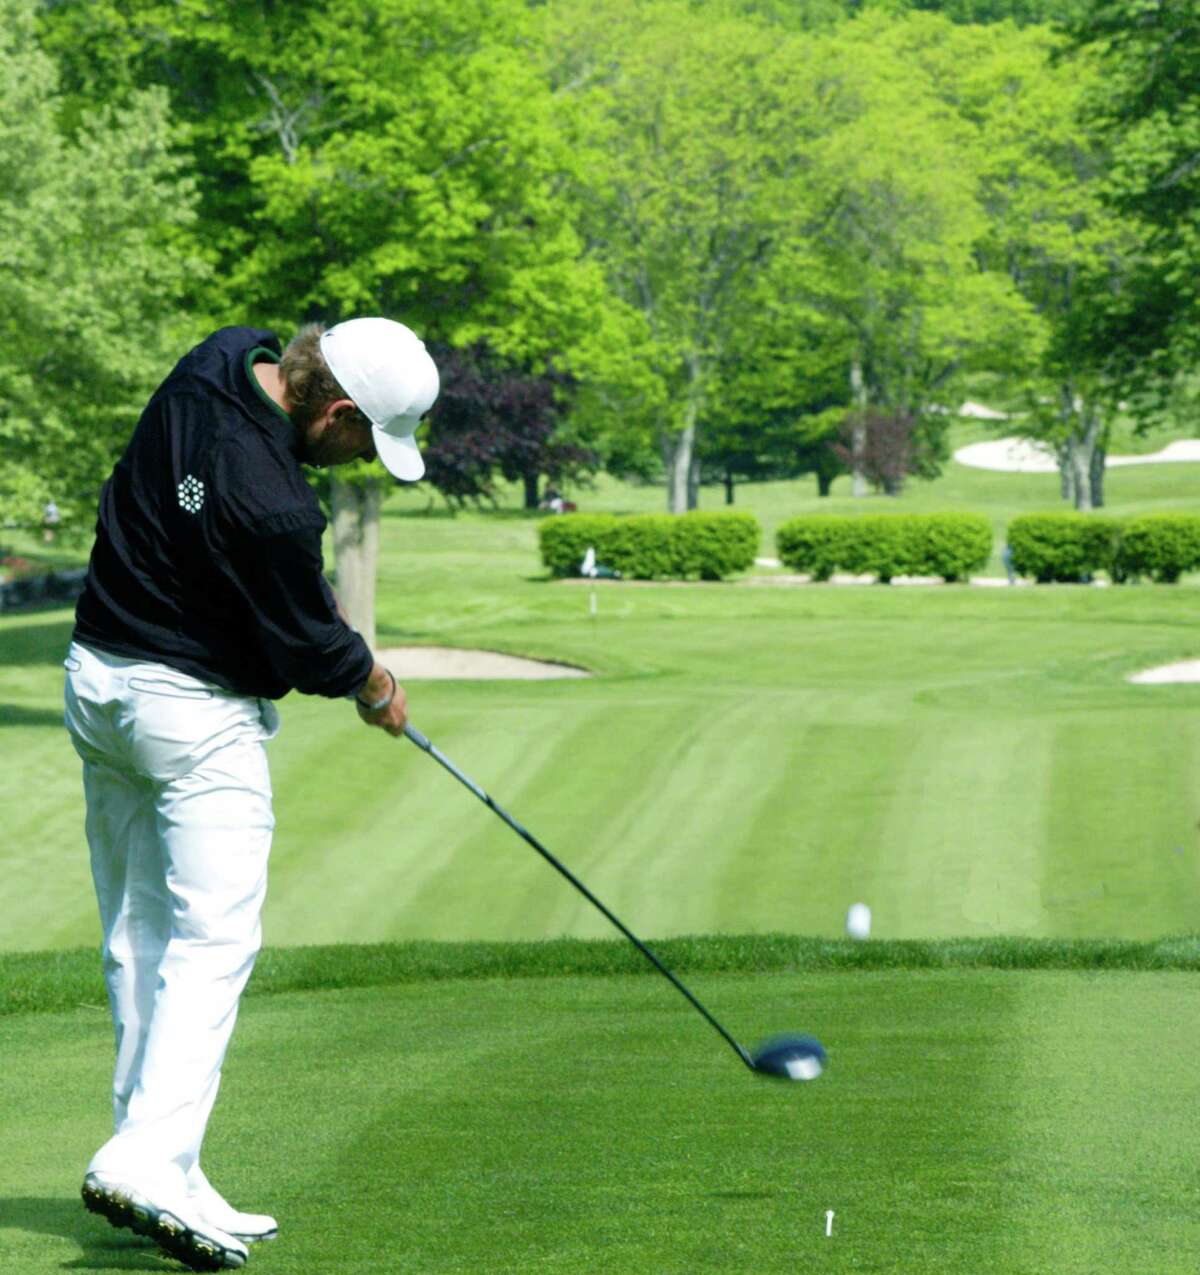 Cole Case of the Green Wave delivers a perfect swing on his tee shot at the picturesque 9th hole for New Milford High School golf during the South-West Conference tournament, May 29, 2014 at Ridgewood Country Club in Danbury.